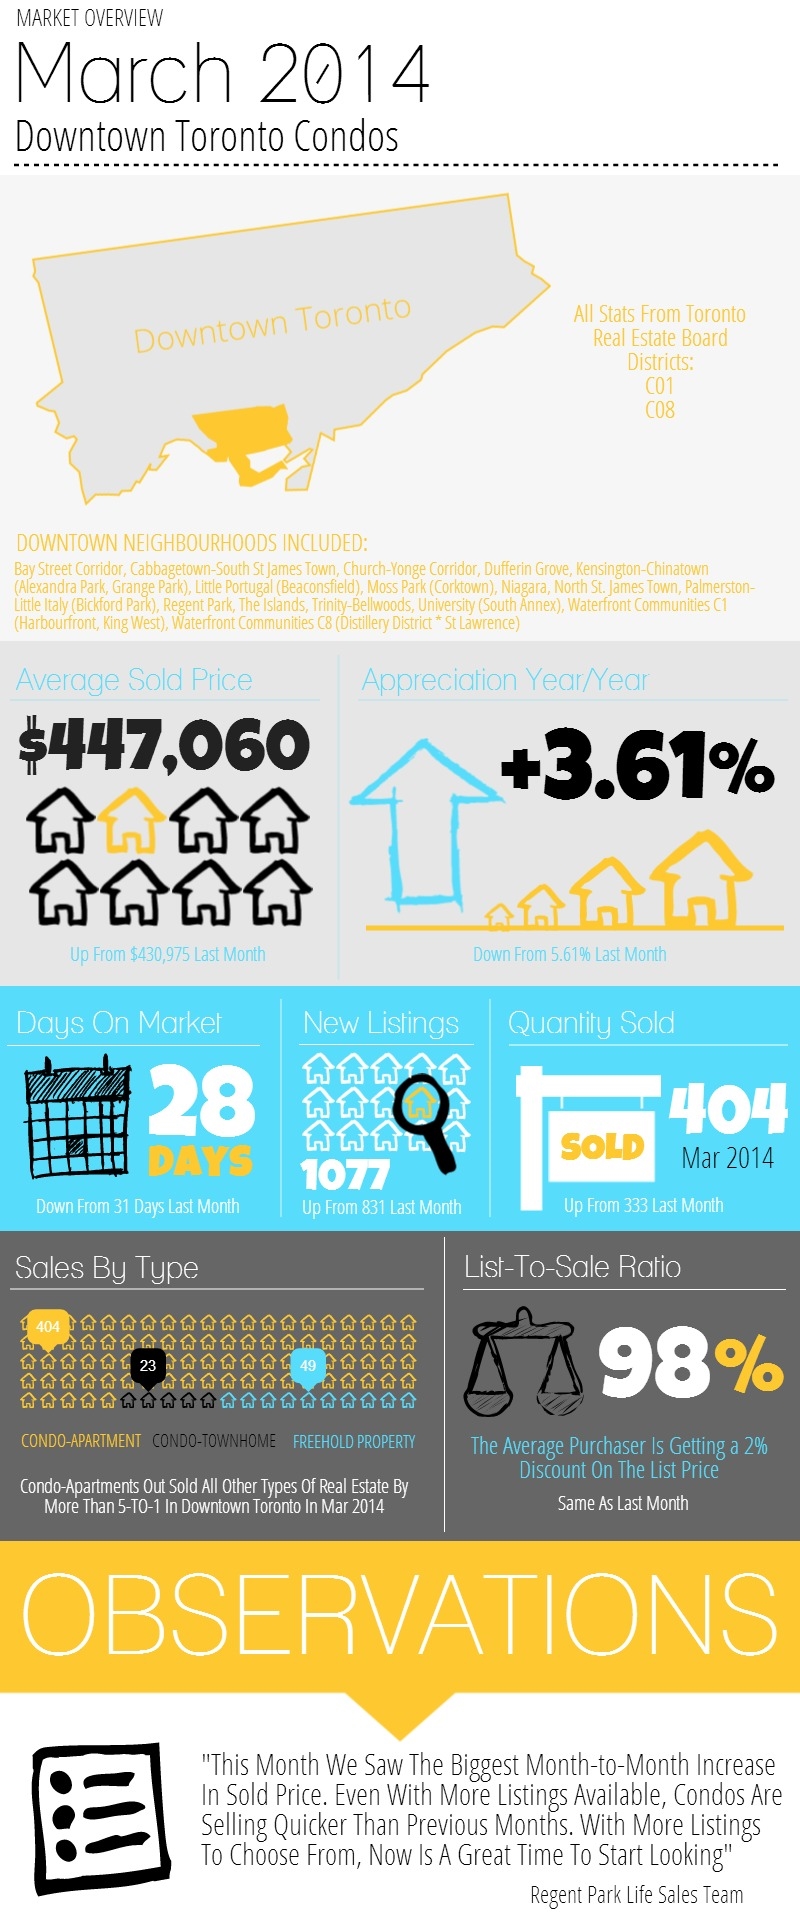 Downtown Toronto Condo Market Overview - March 2014